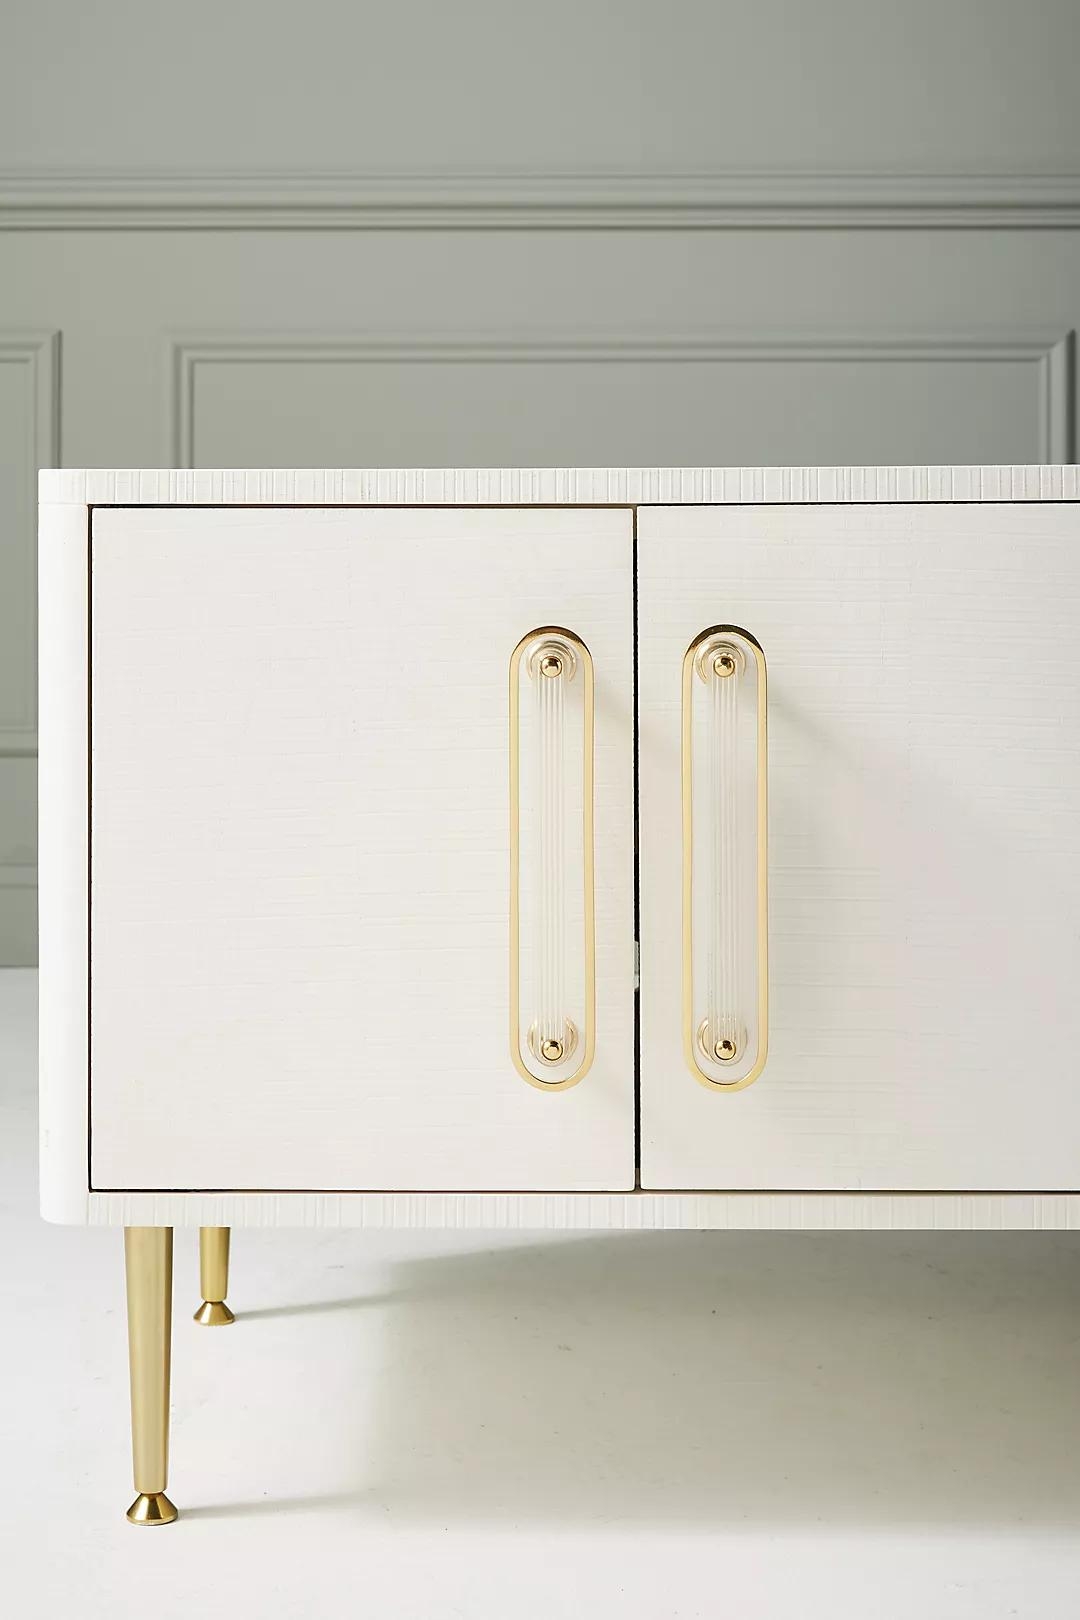 Odetta Media Console By Tracey Boyd in Beige - Image 5